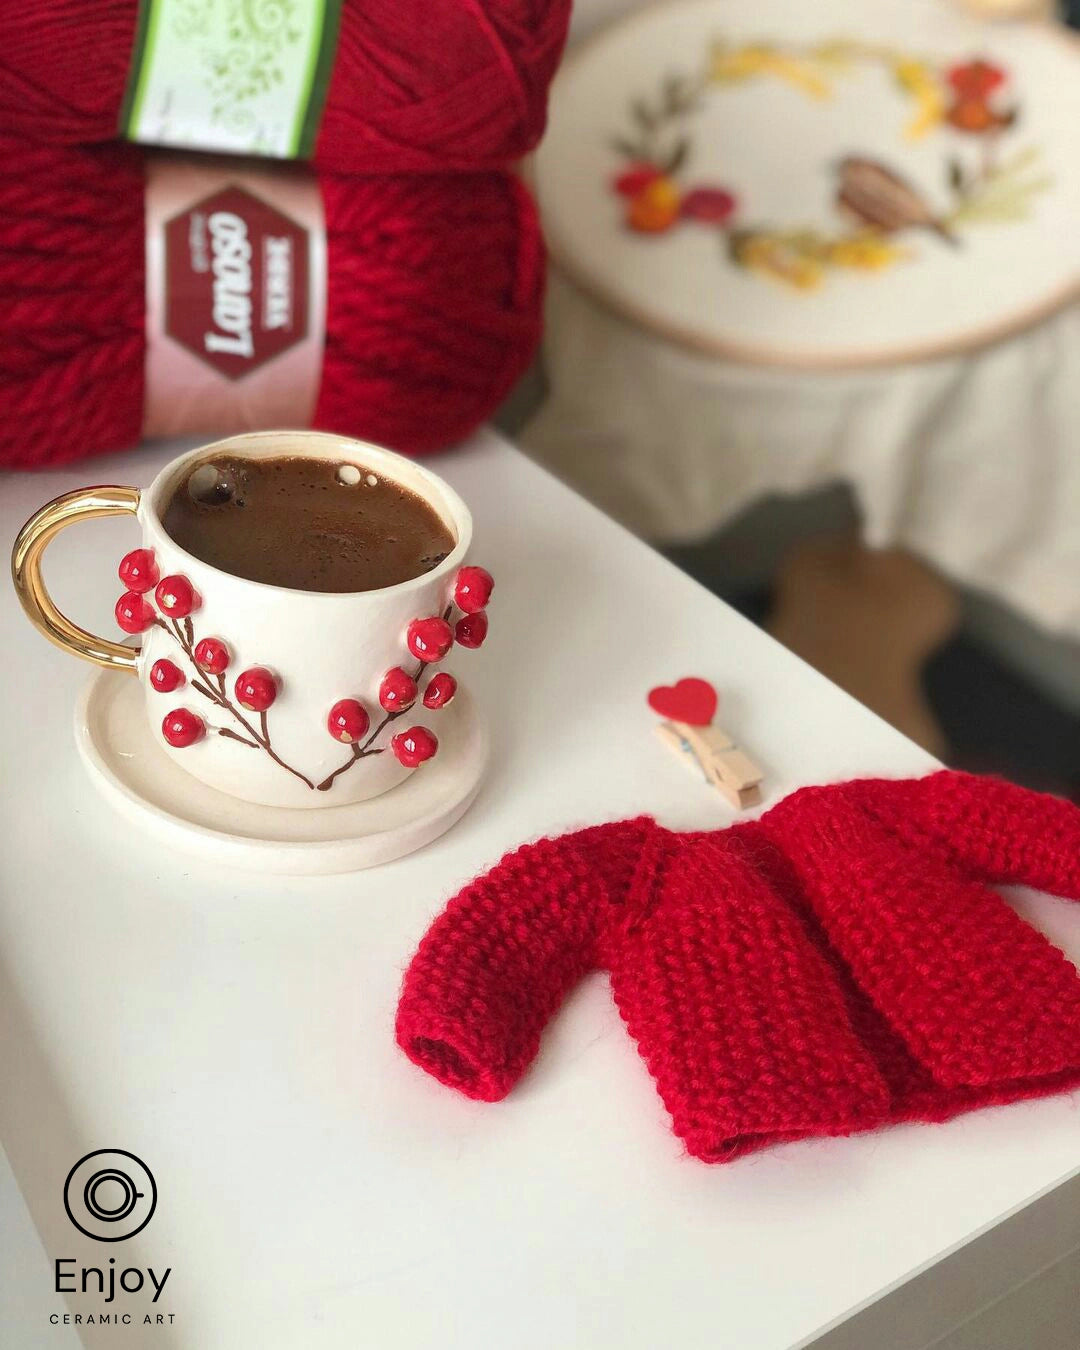 Handcrafted espresso cup with winterberry design and gold handle, filled with coffee, beside a red knitted cardigan and crafting supplies, evoking a warm, artistic atmosphere